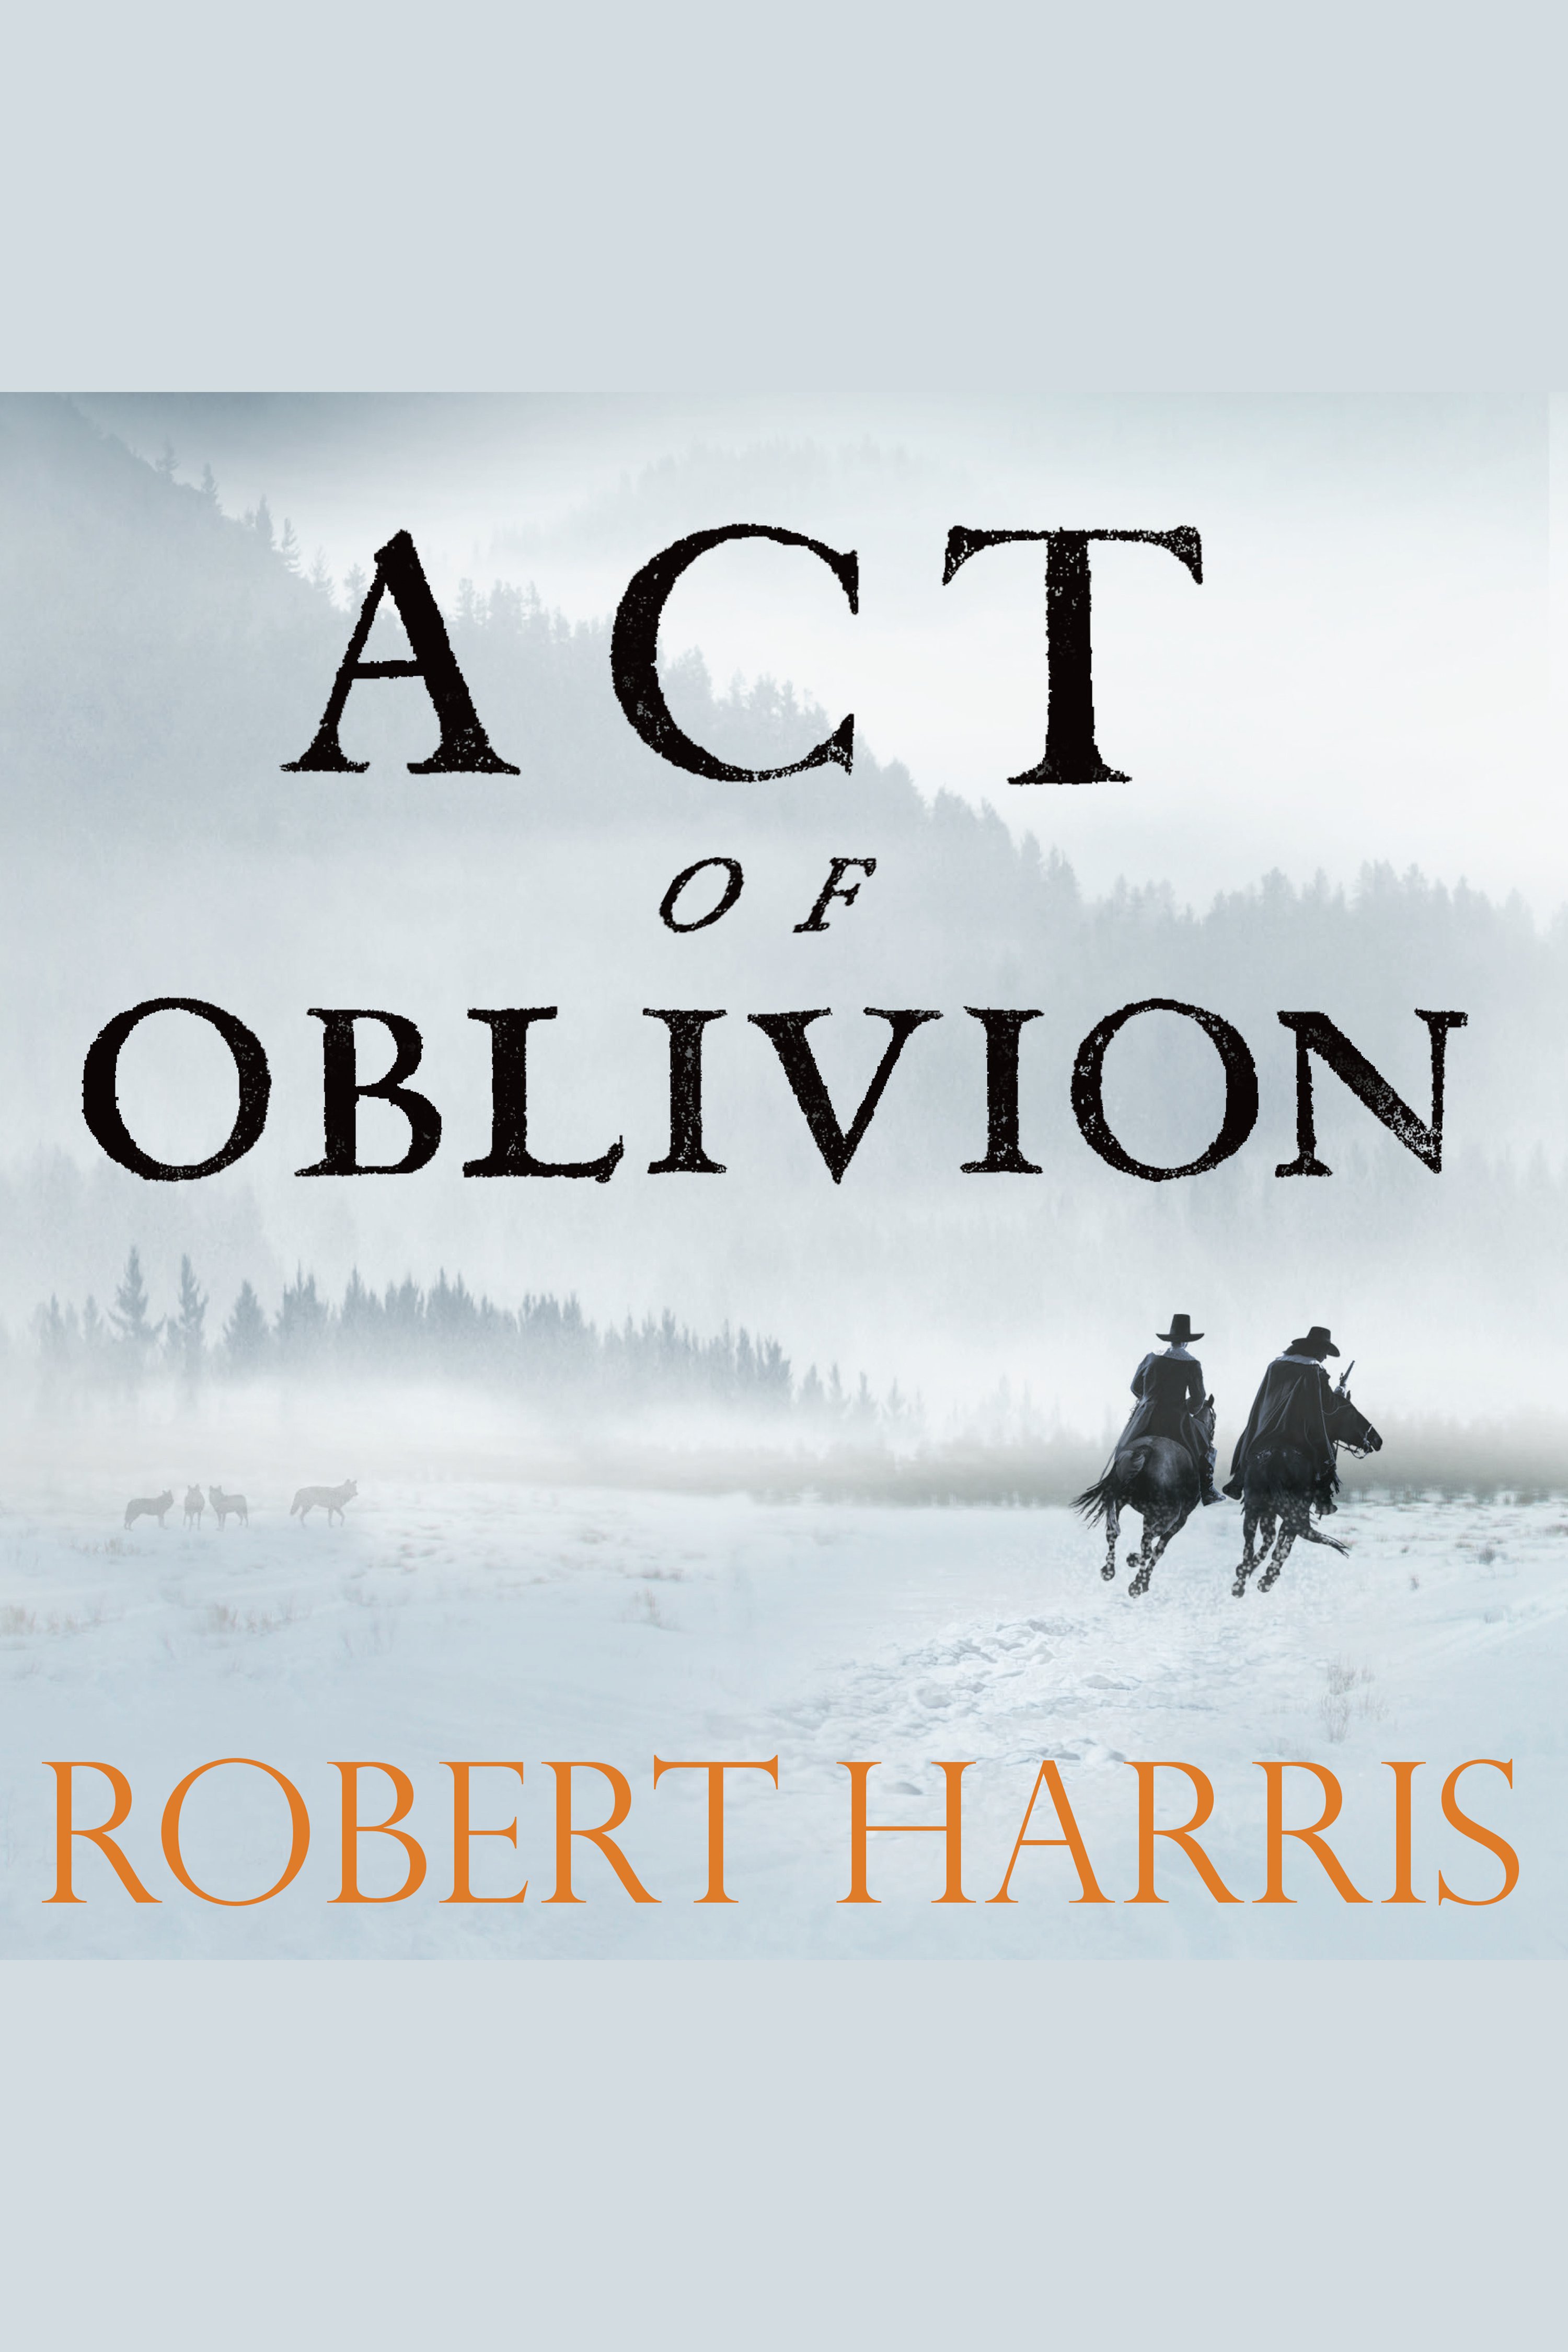 Act of Oblivion